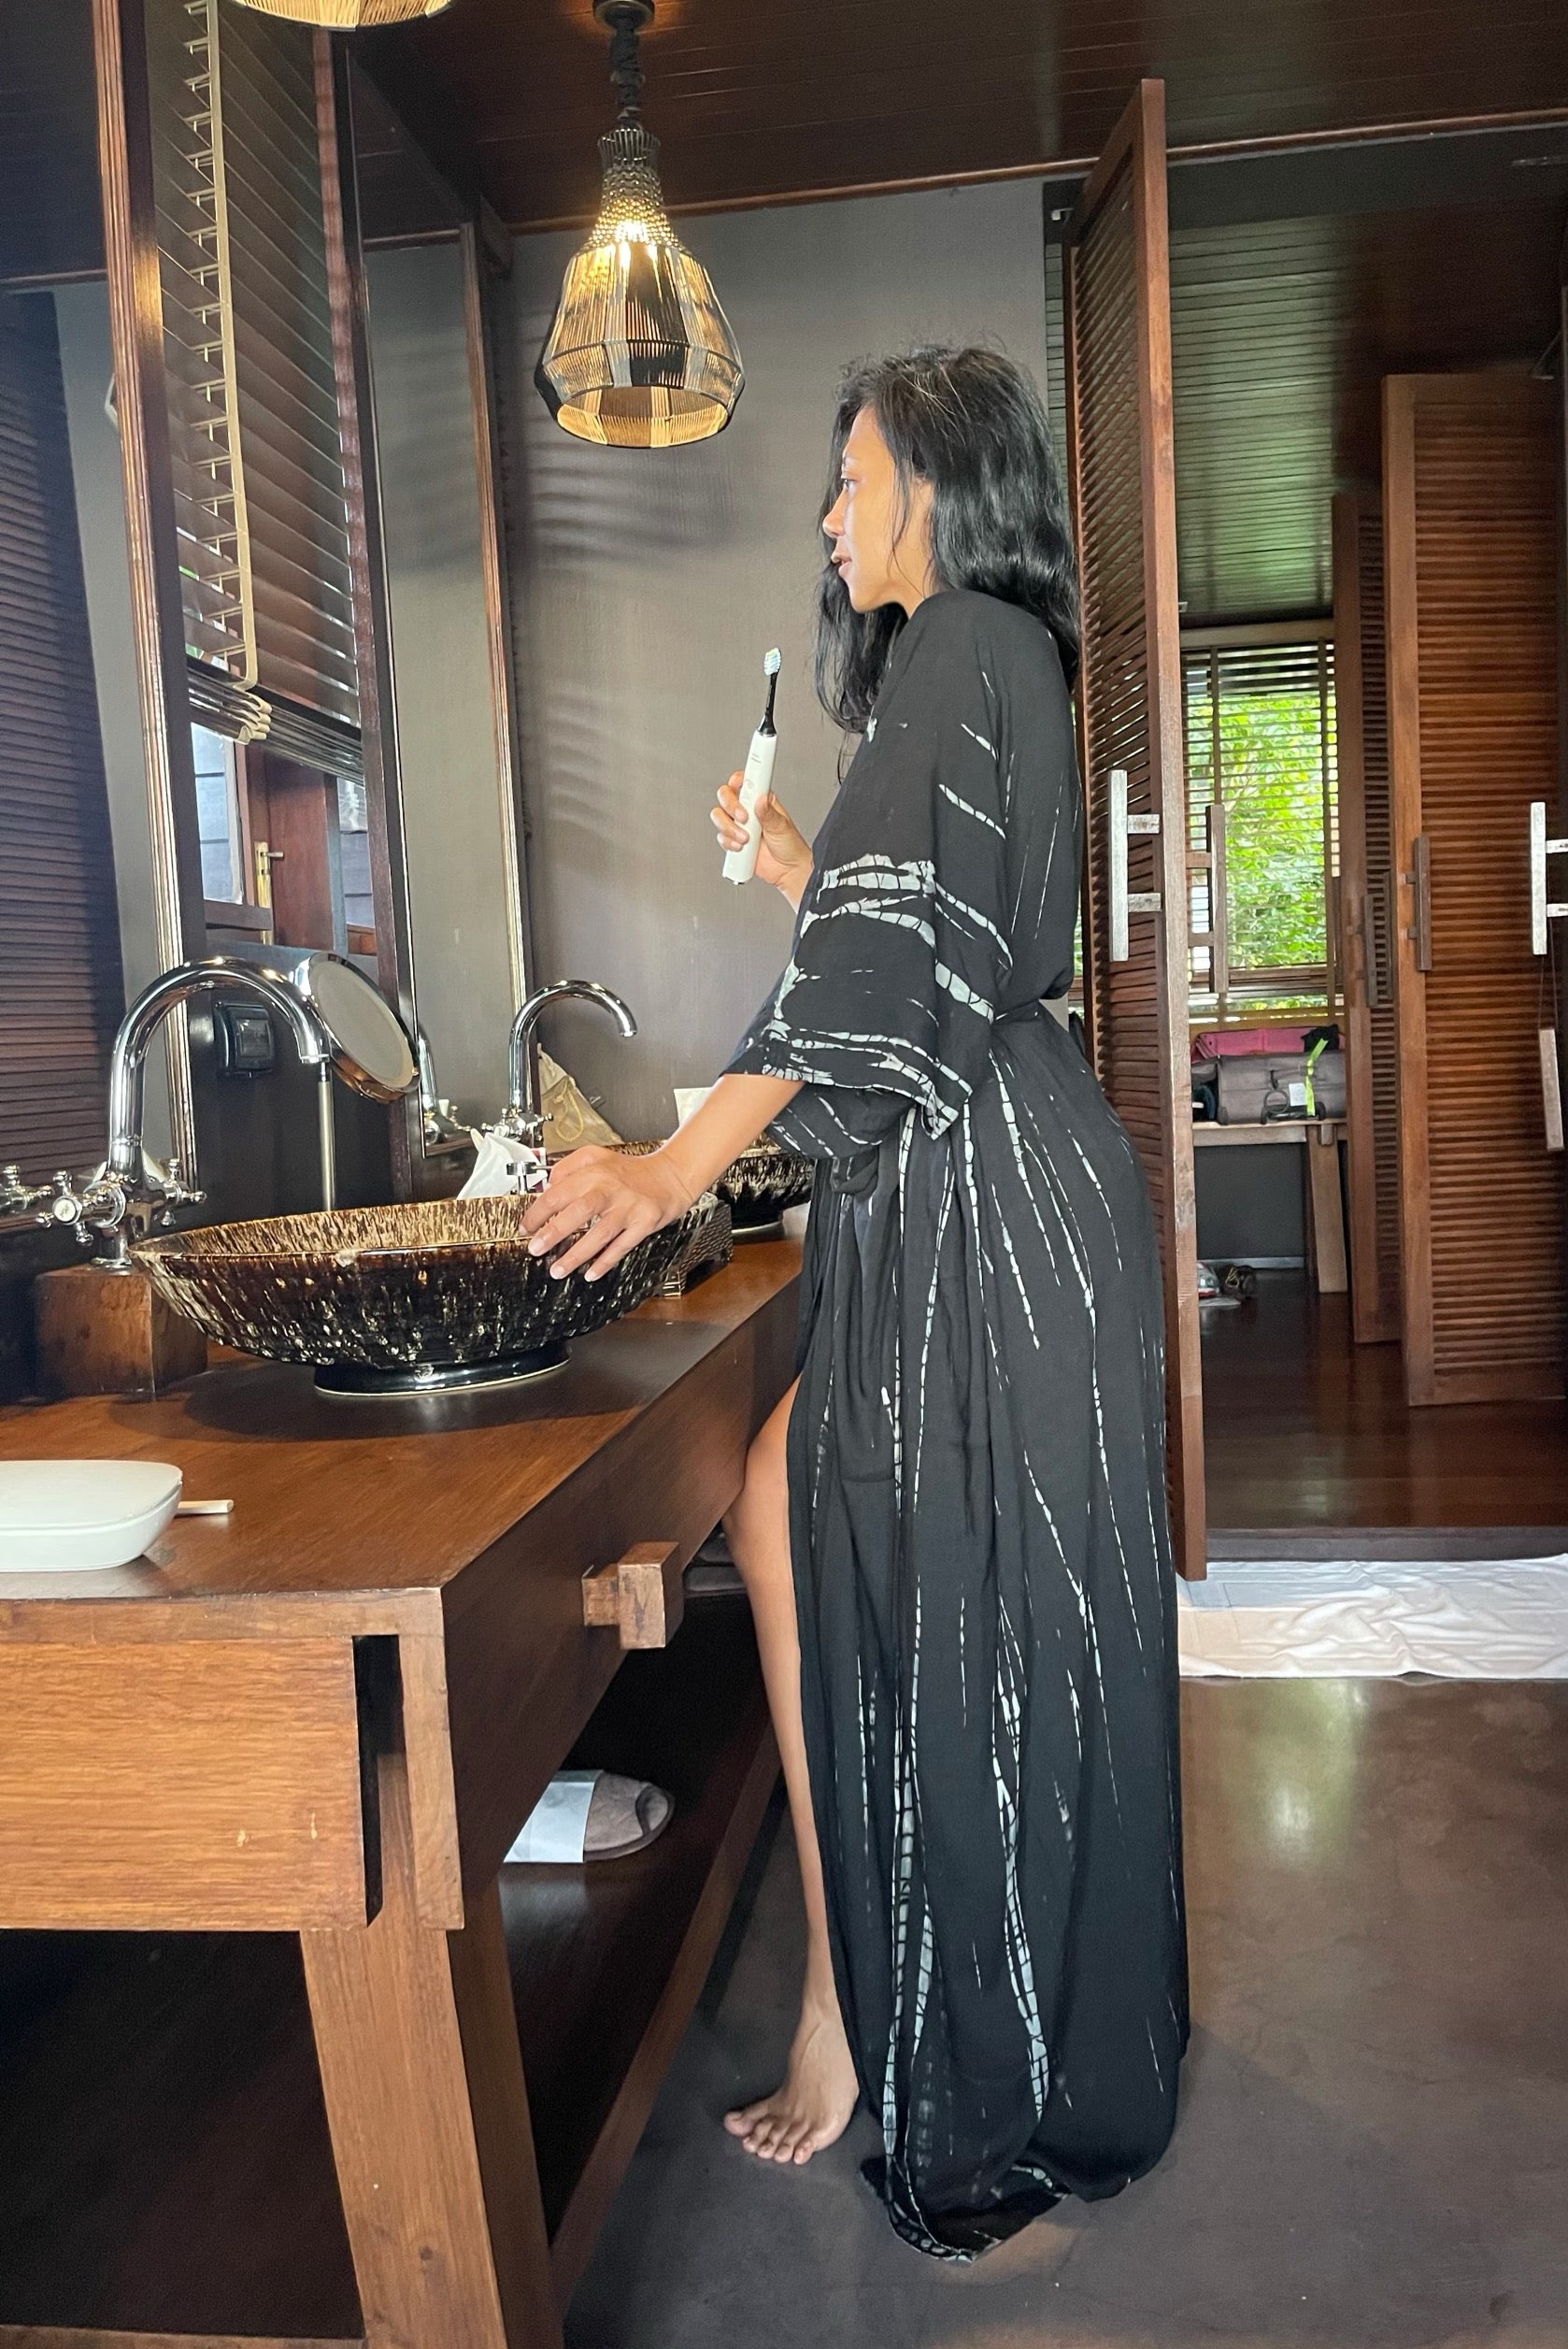 Airy in fabric and fabrication, this Maya Tie dye Kimono Robe - Plus size kimono robe, black long kimono robe exquisitely long Kaftan Kimono will have you feeling oh-so-comfy and beautiful, prefect for beach coverup, loungewear or everyday wear.